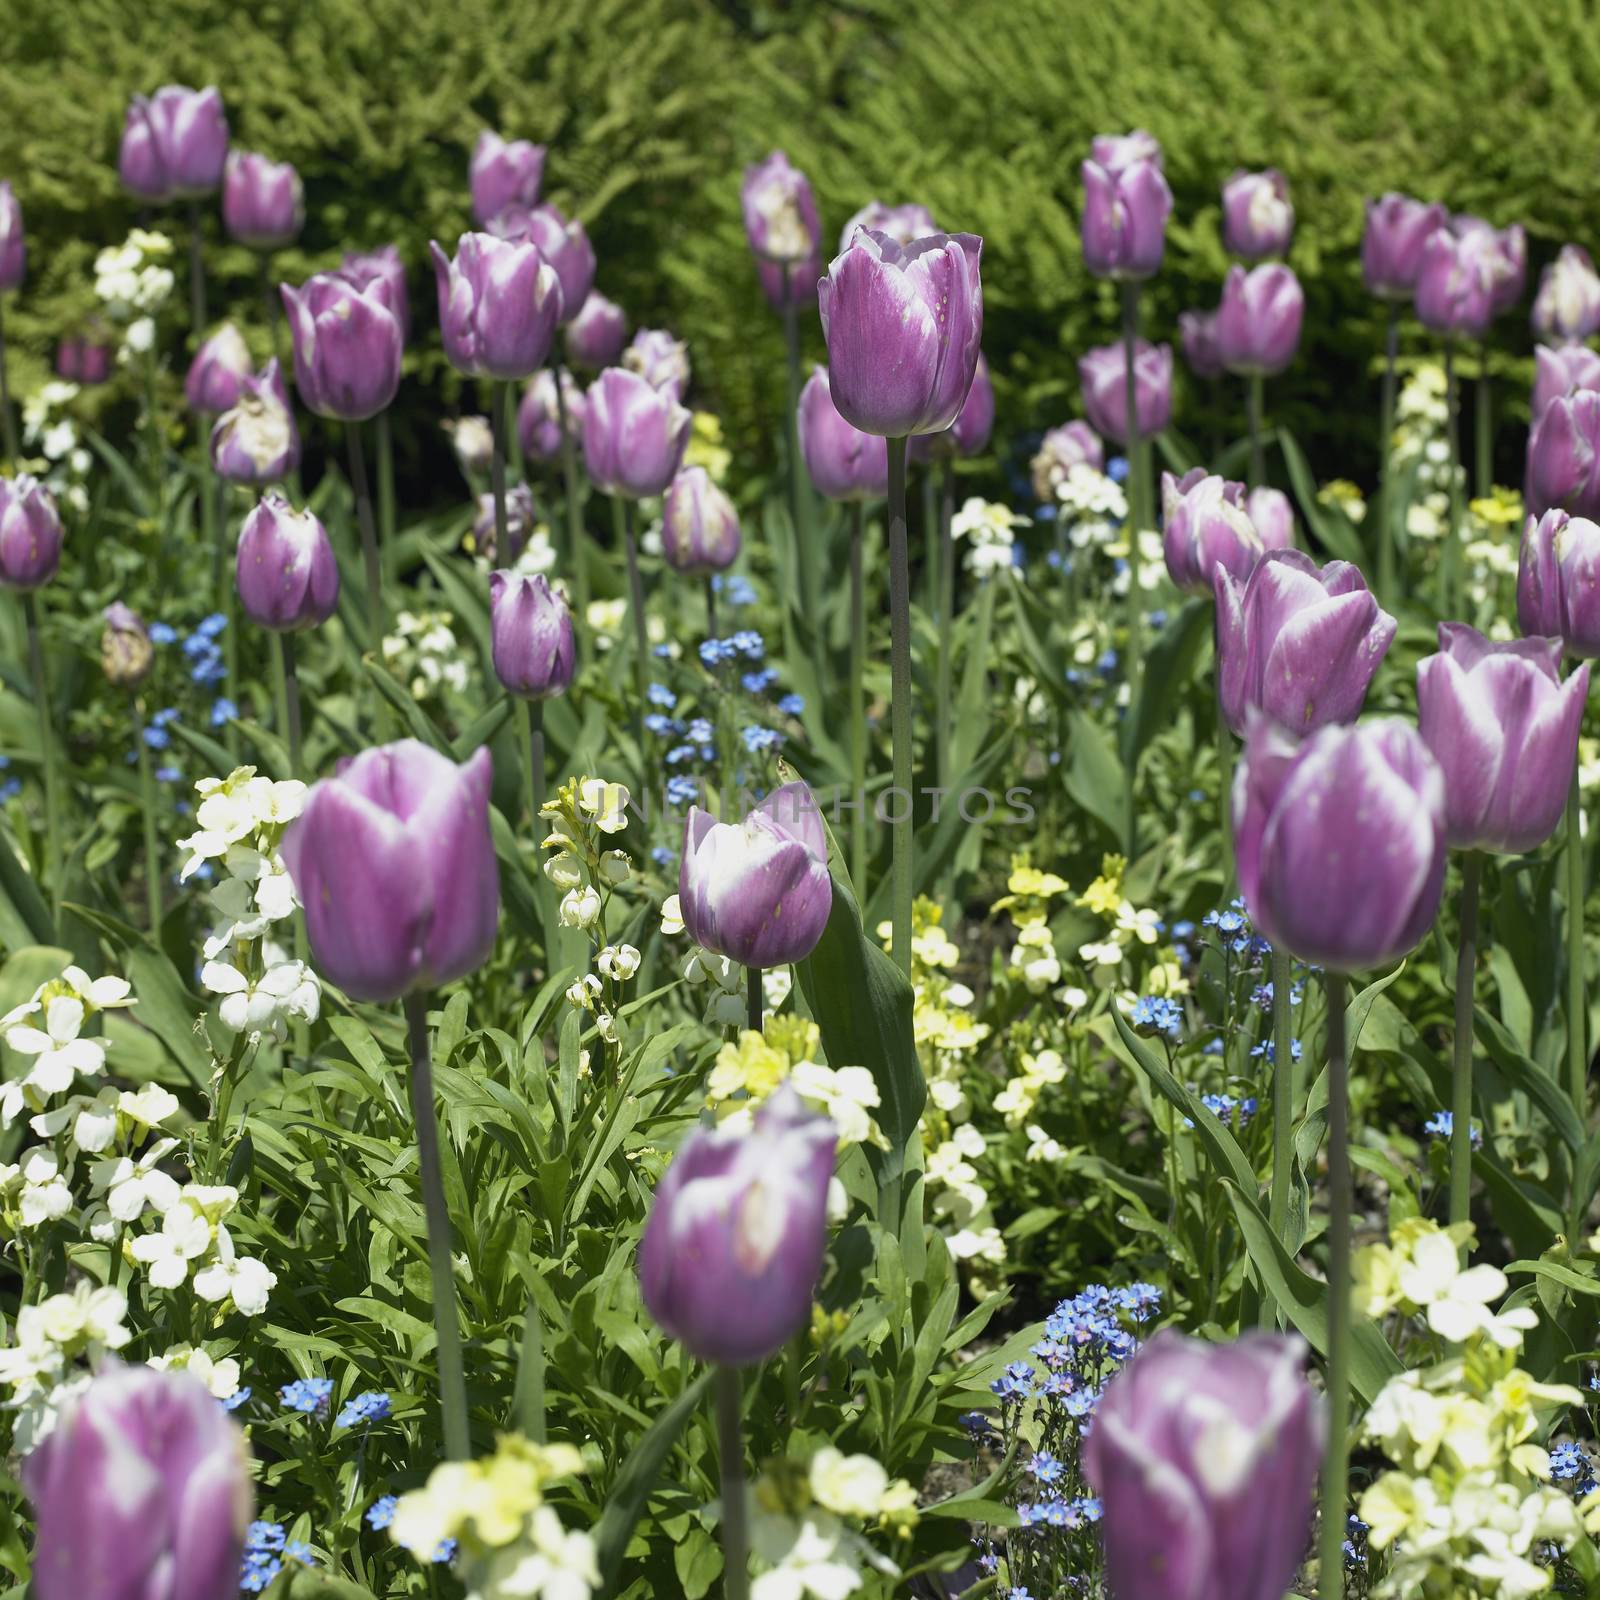 Large garden of purple tulips and smaller flowers